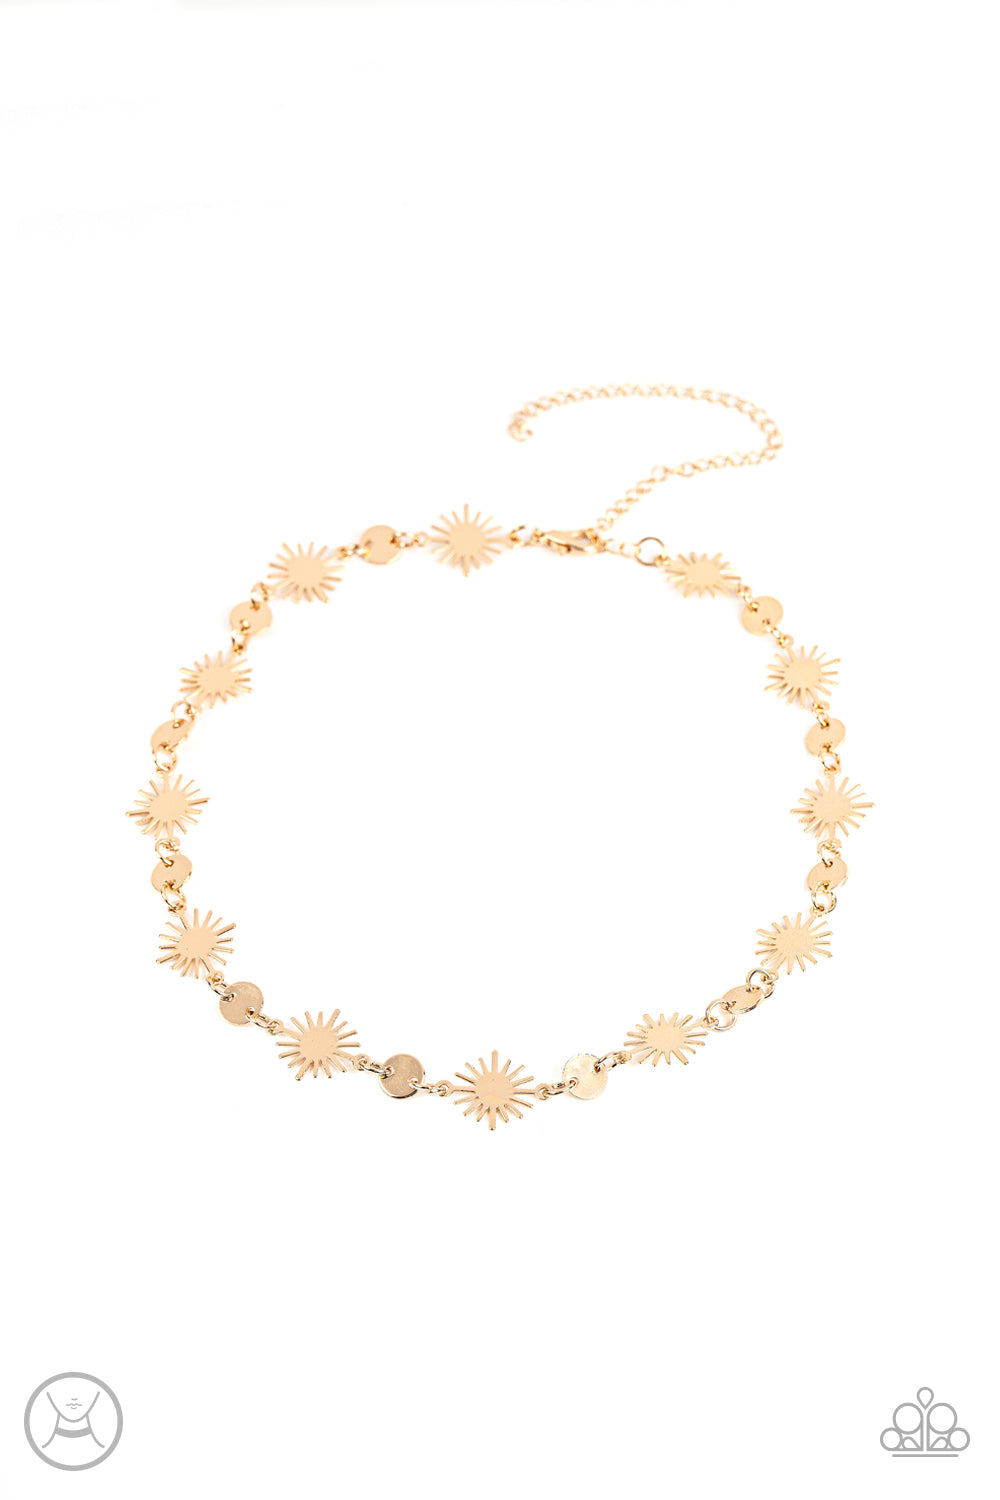 Astro Goddess - Gold Choker Necklace - Paparazzi Accessories - Dainty gold discs delicately alternate with starry gold sunbursts, linking into a celestial centerpiece around the neck. Features an adjustable clasp closure. Sold as one individual choker necklace.